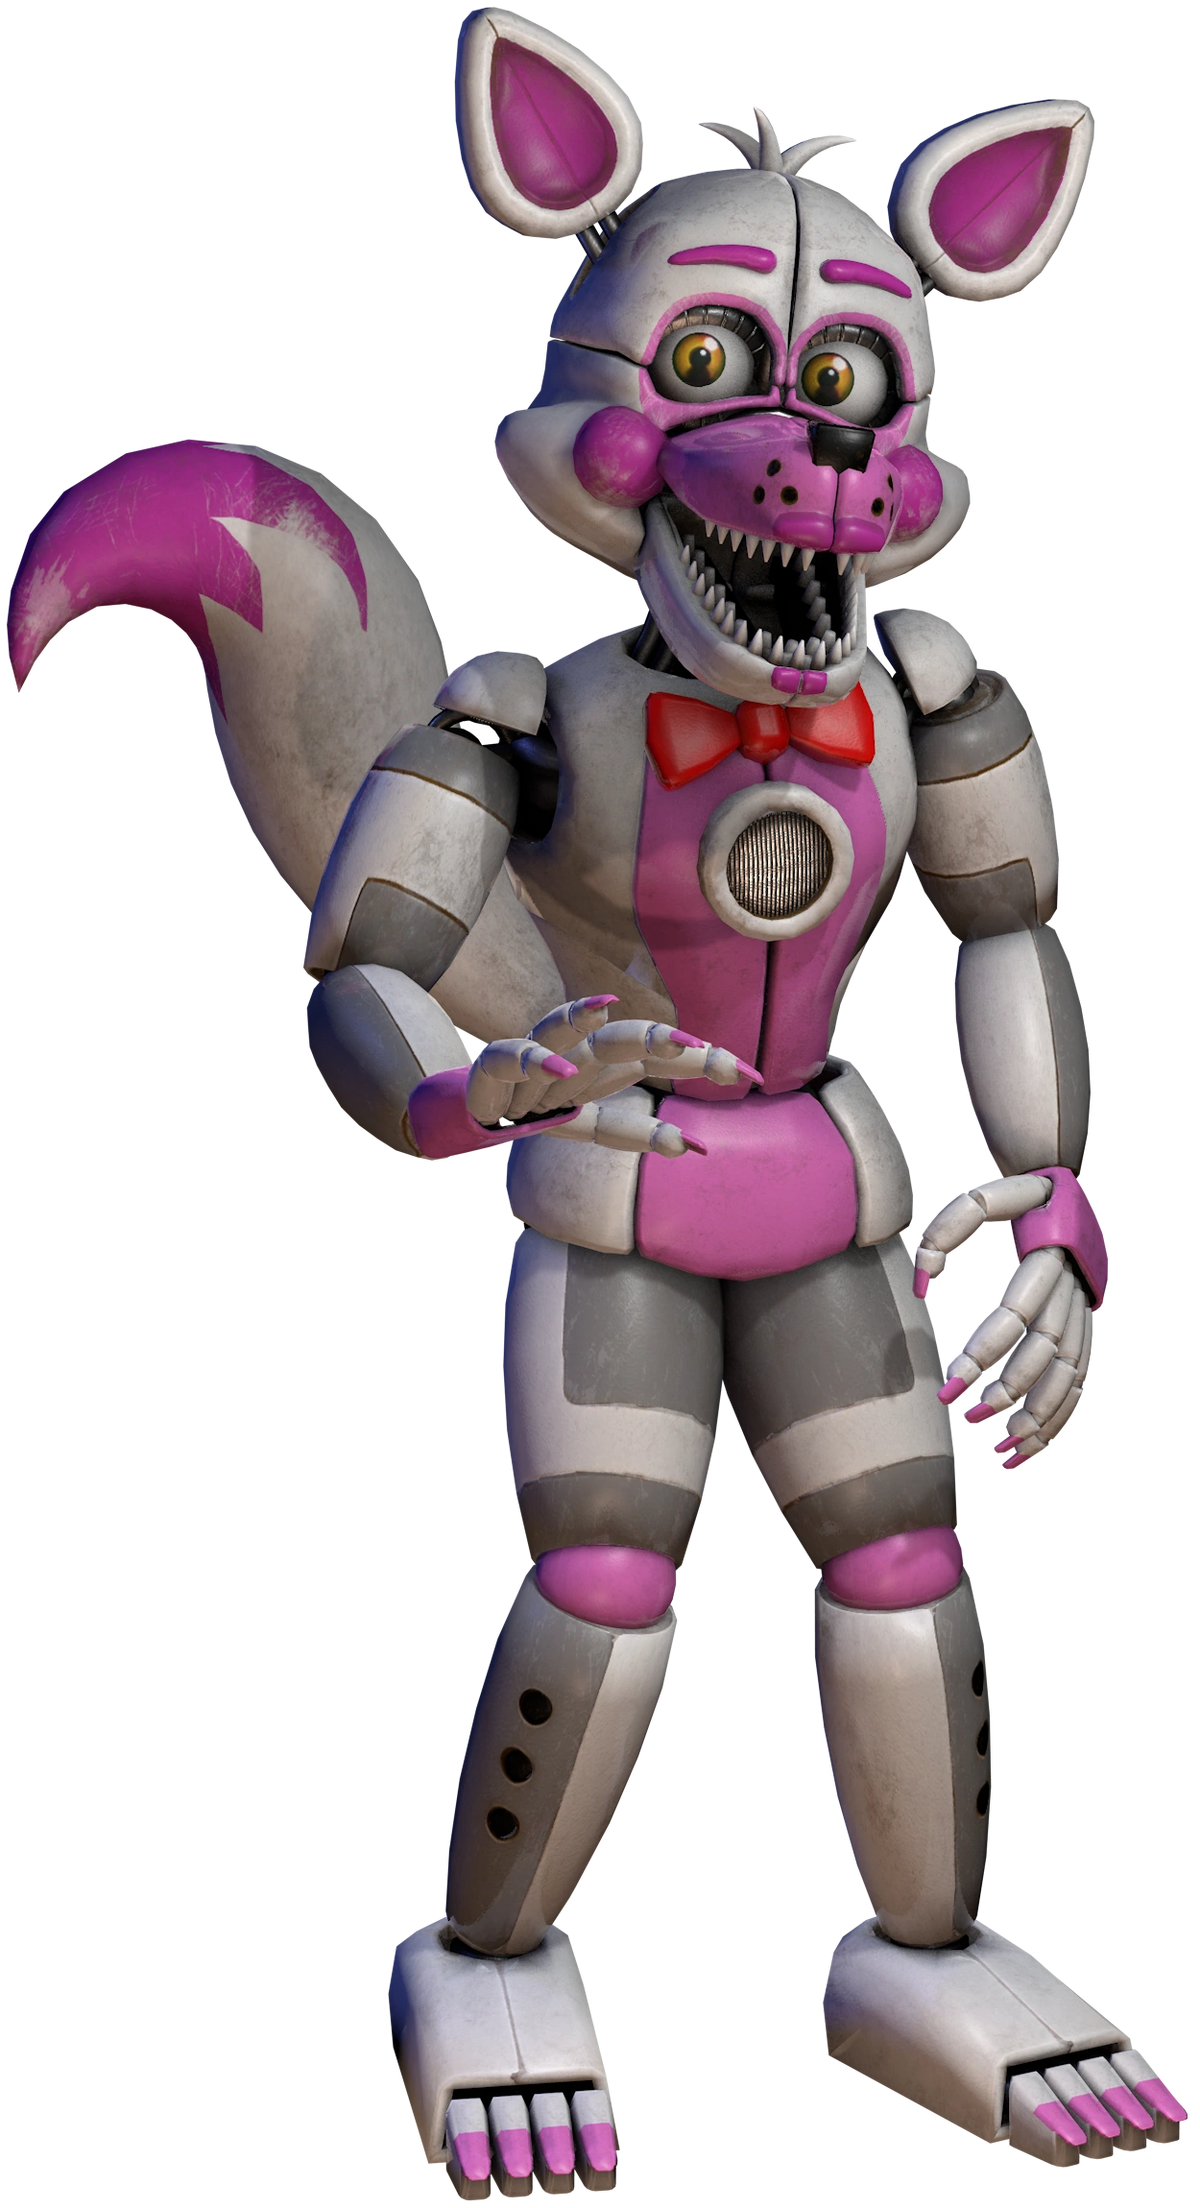 Lolbit is my favorite. He's the cool version of Funtime Foxy